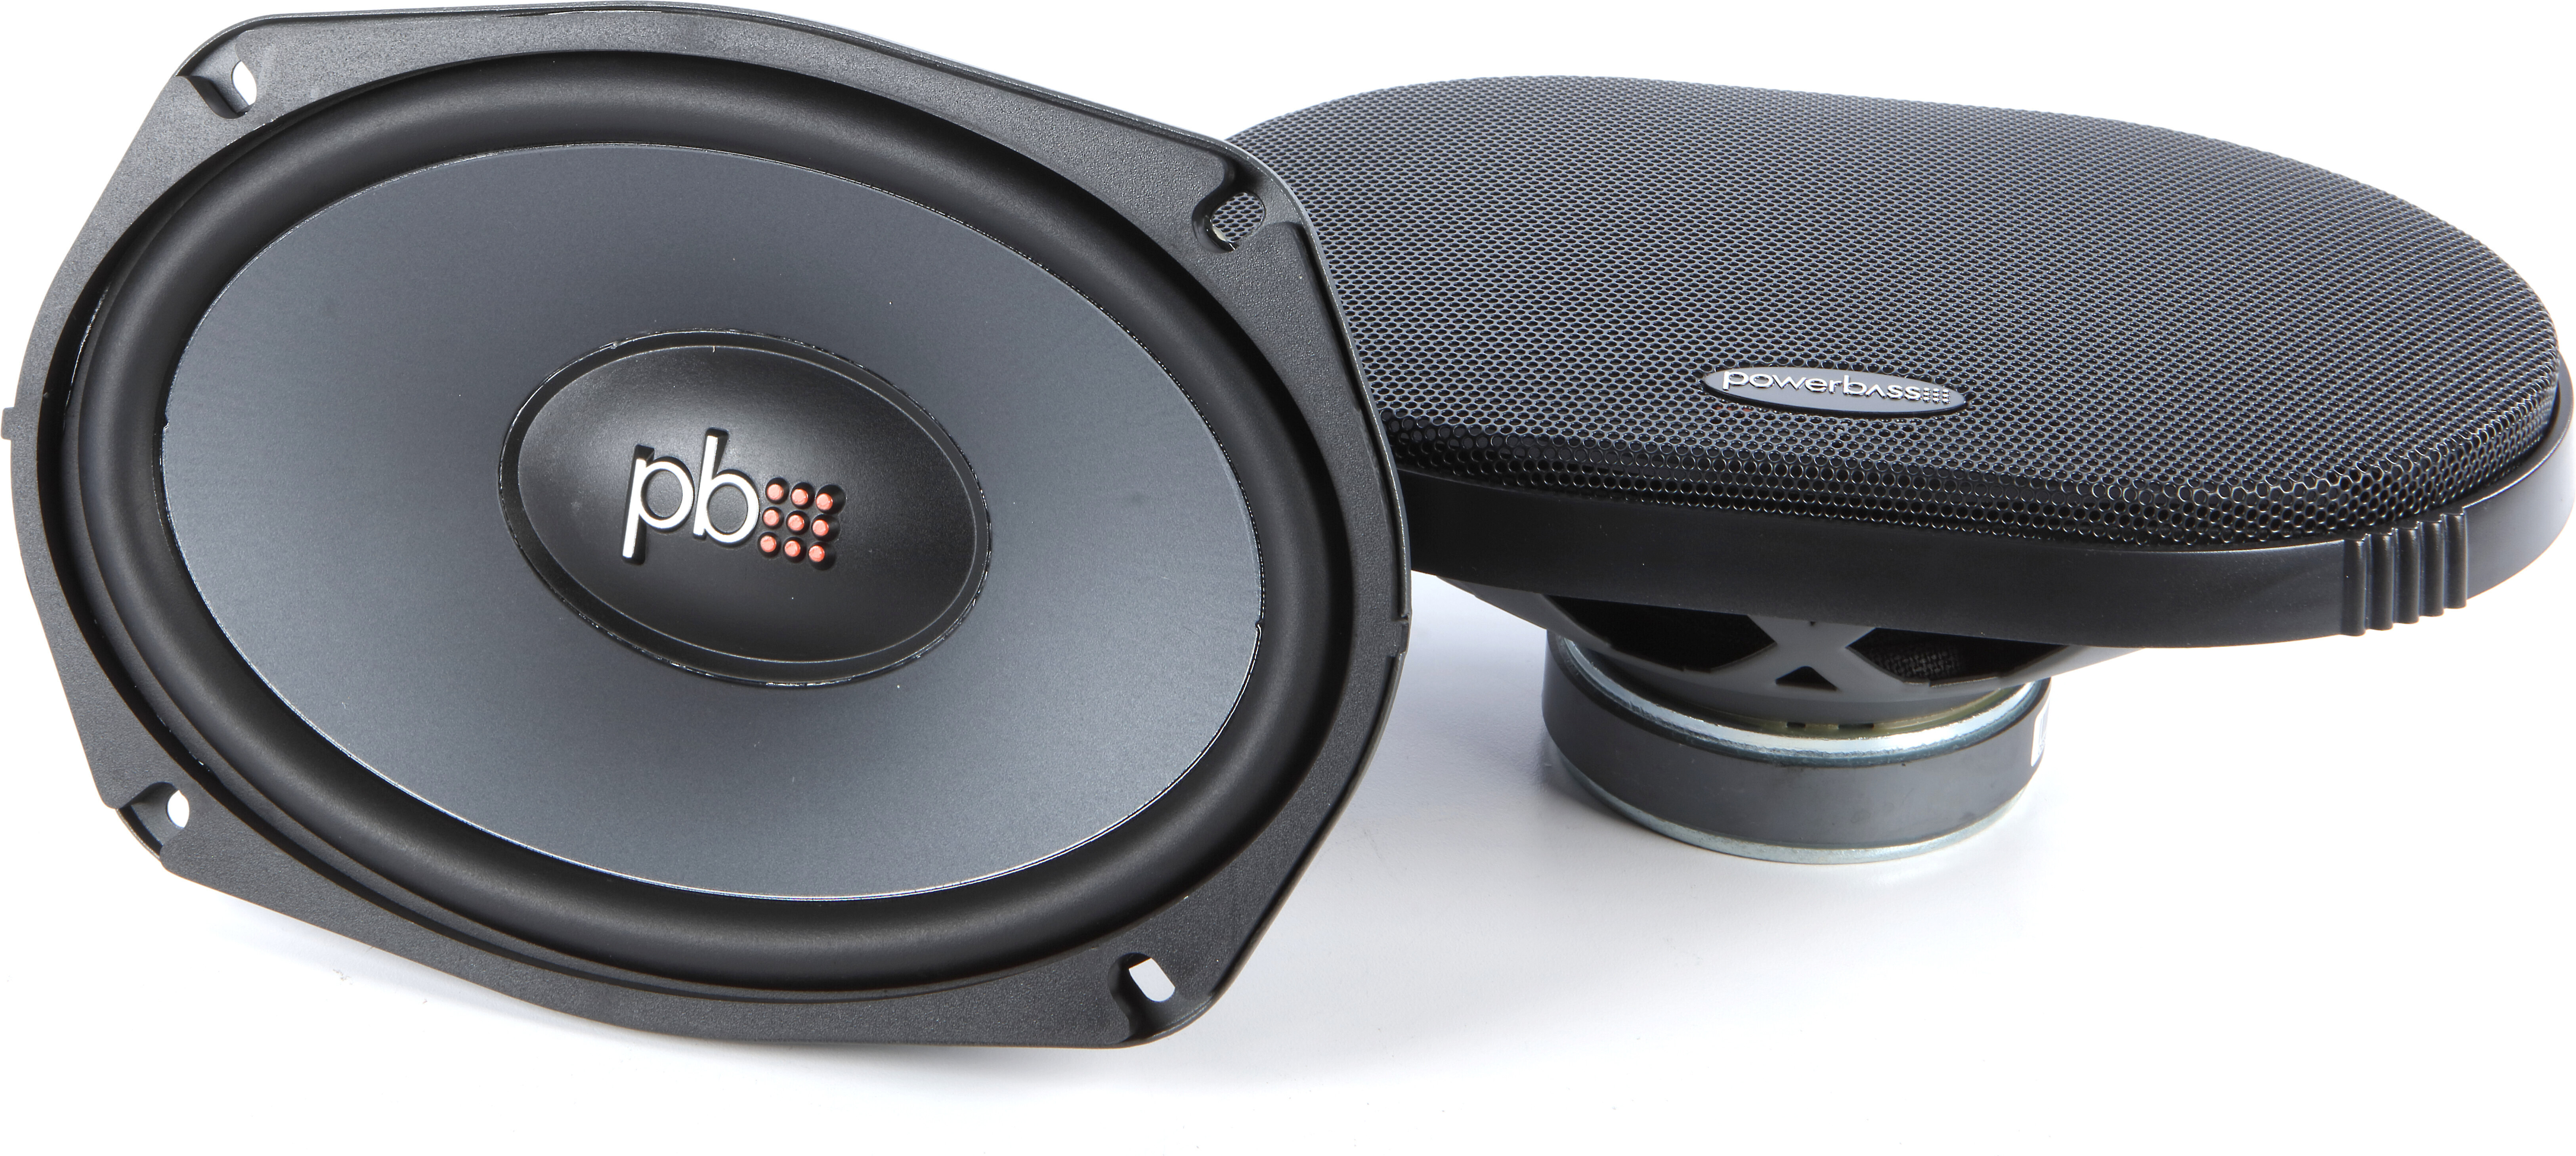 front-6x9-mid-range-speakers-chevy-colorado-gmc-canyon